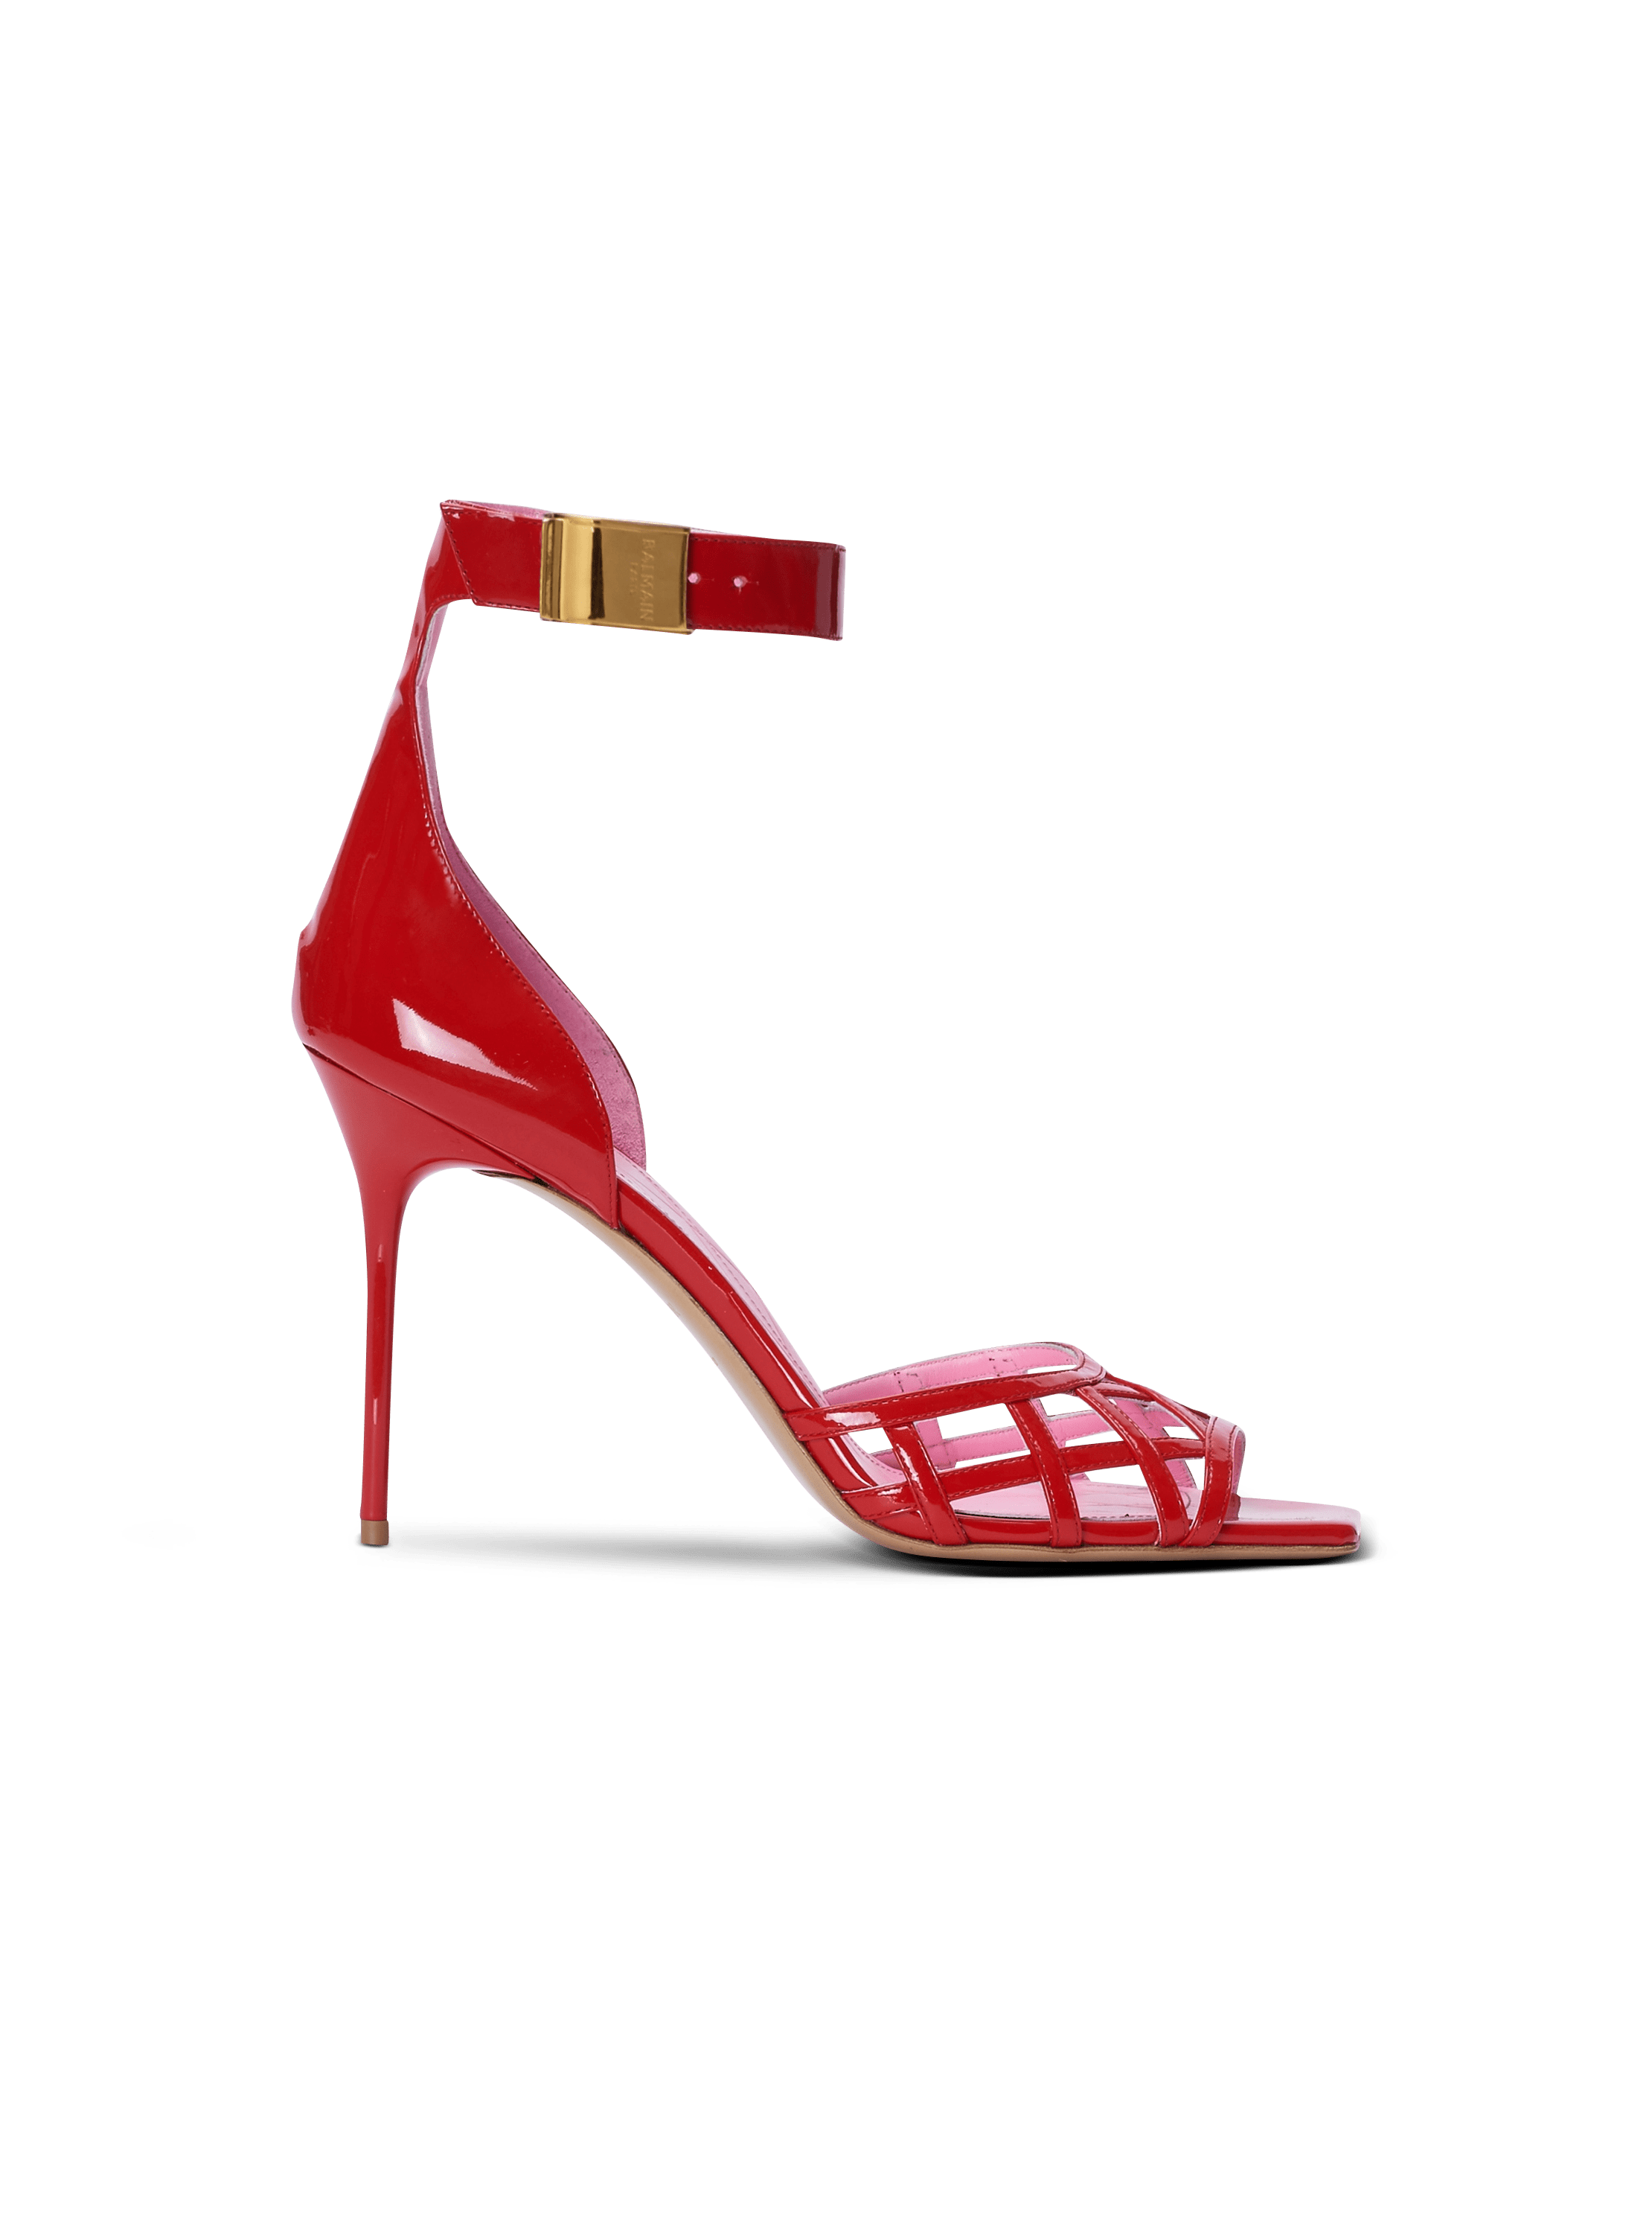 Patent leather Uma sandals with openwork grid, red, hi-res